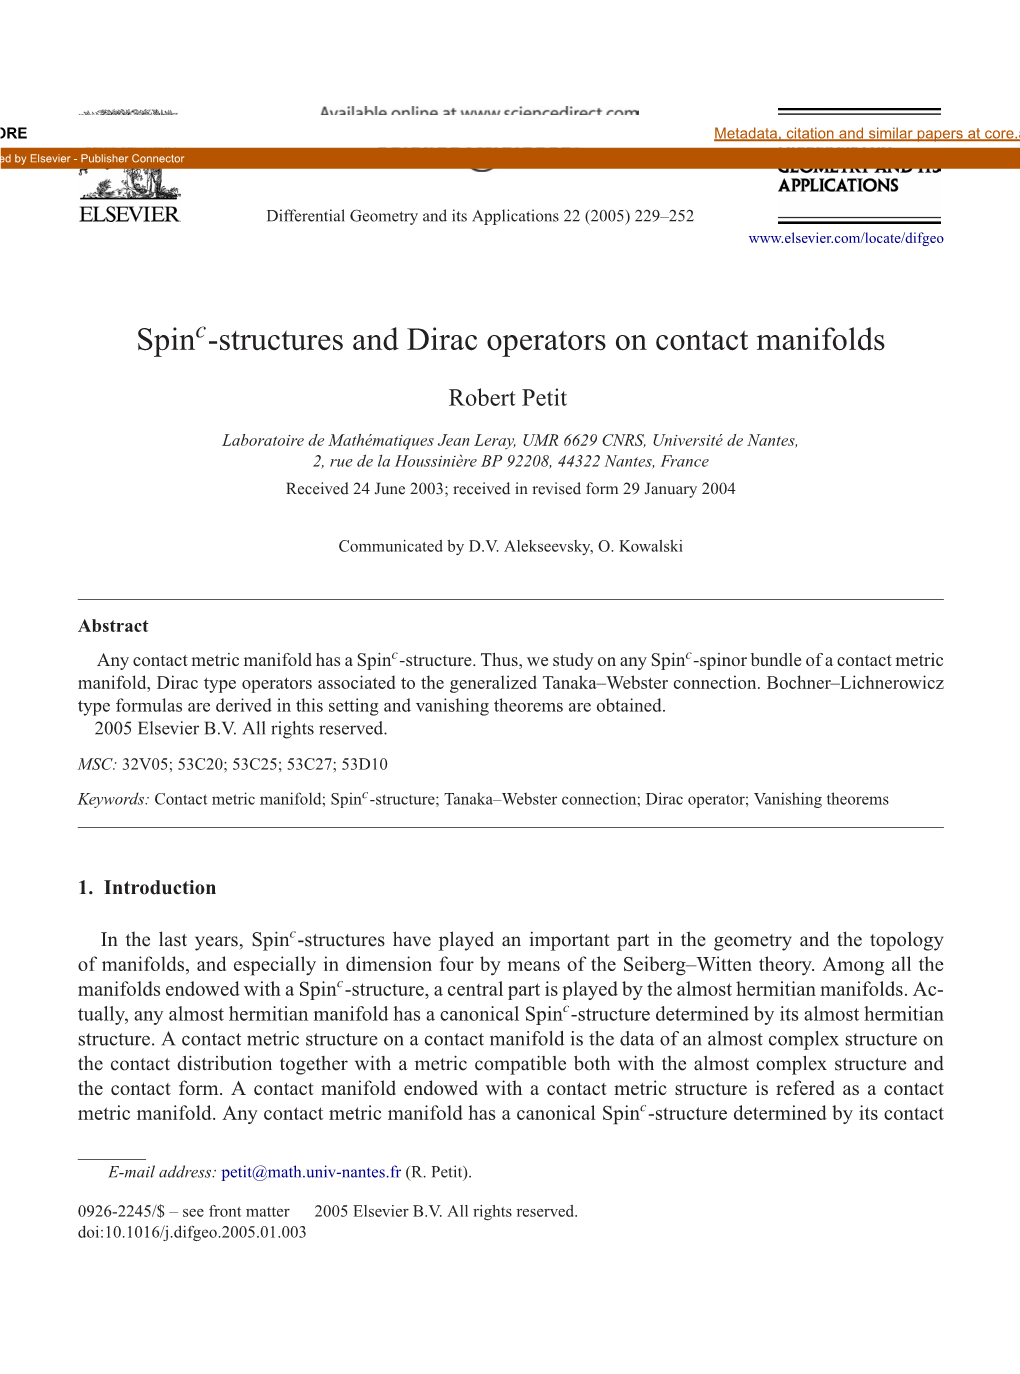 Spin -Structures and Dirac Operators on Contact Manifolds